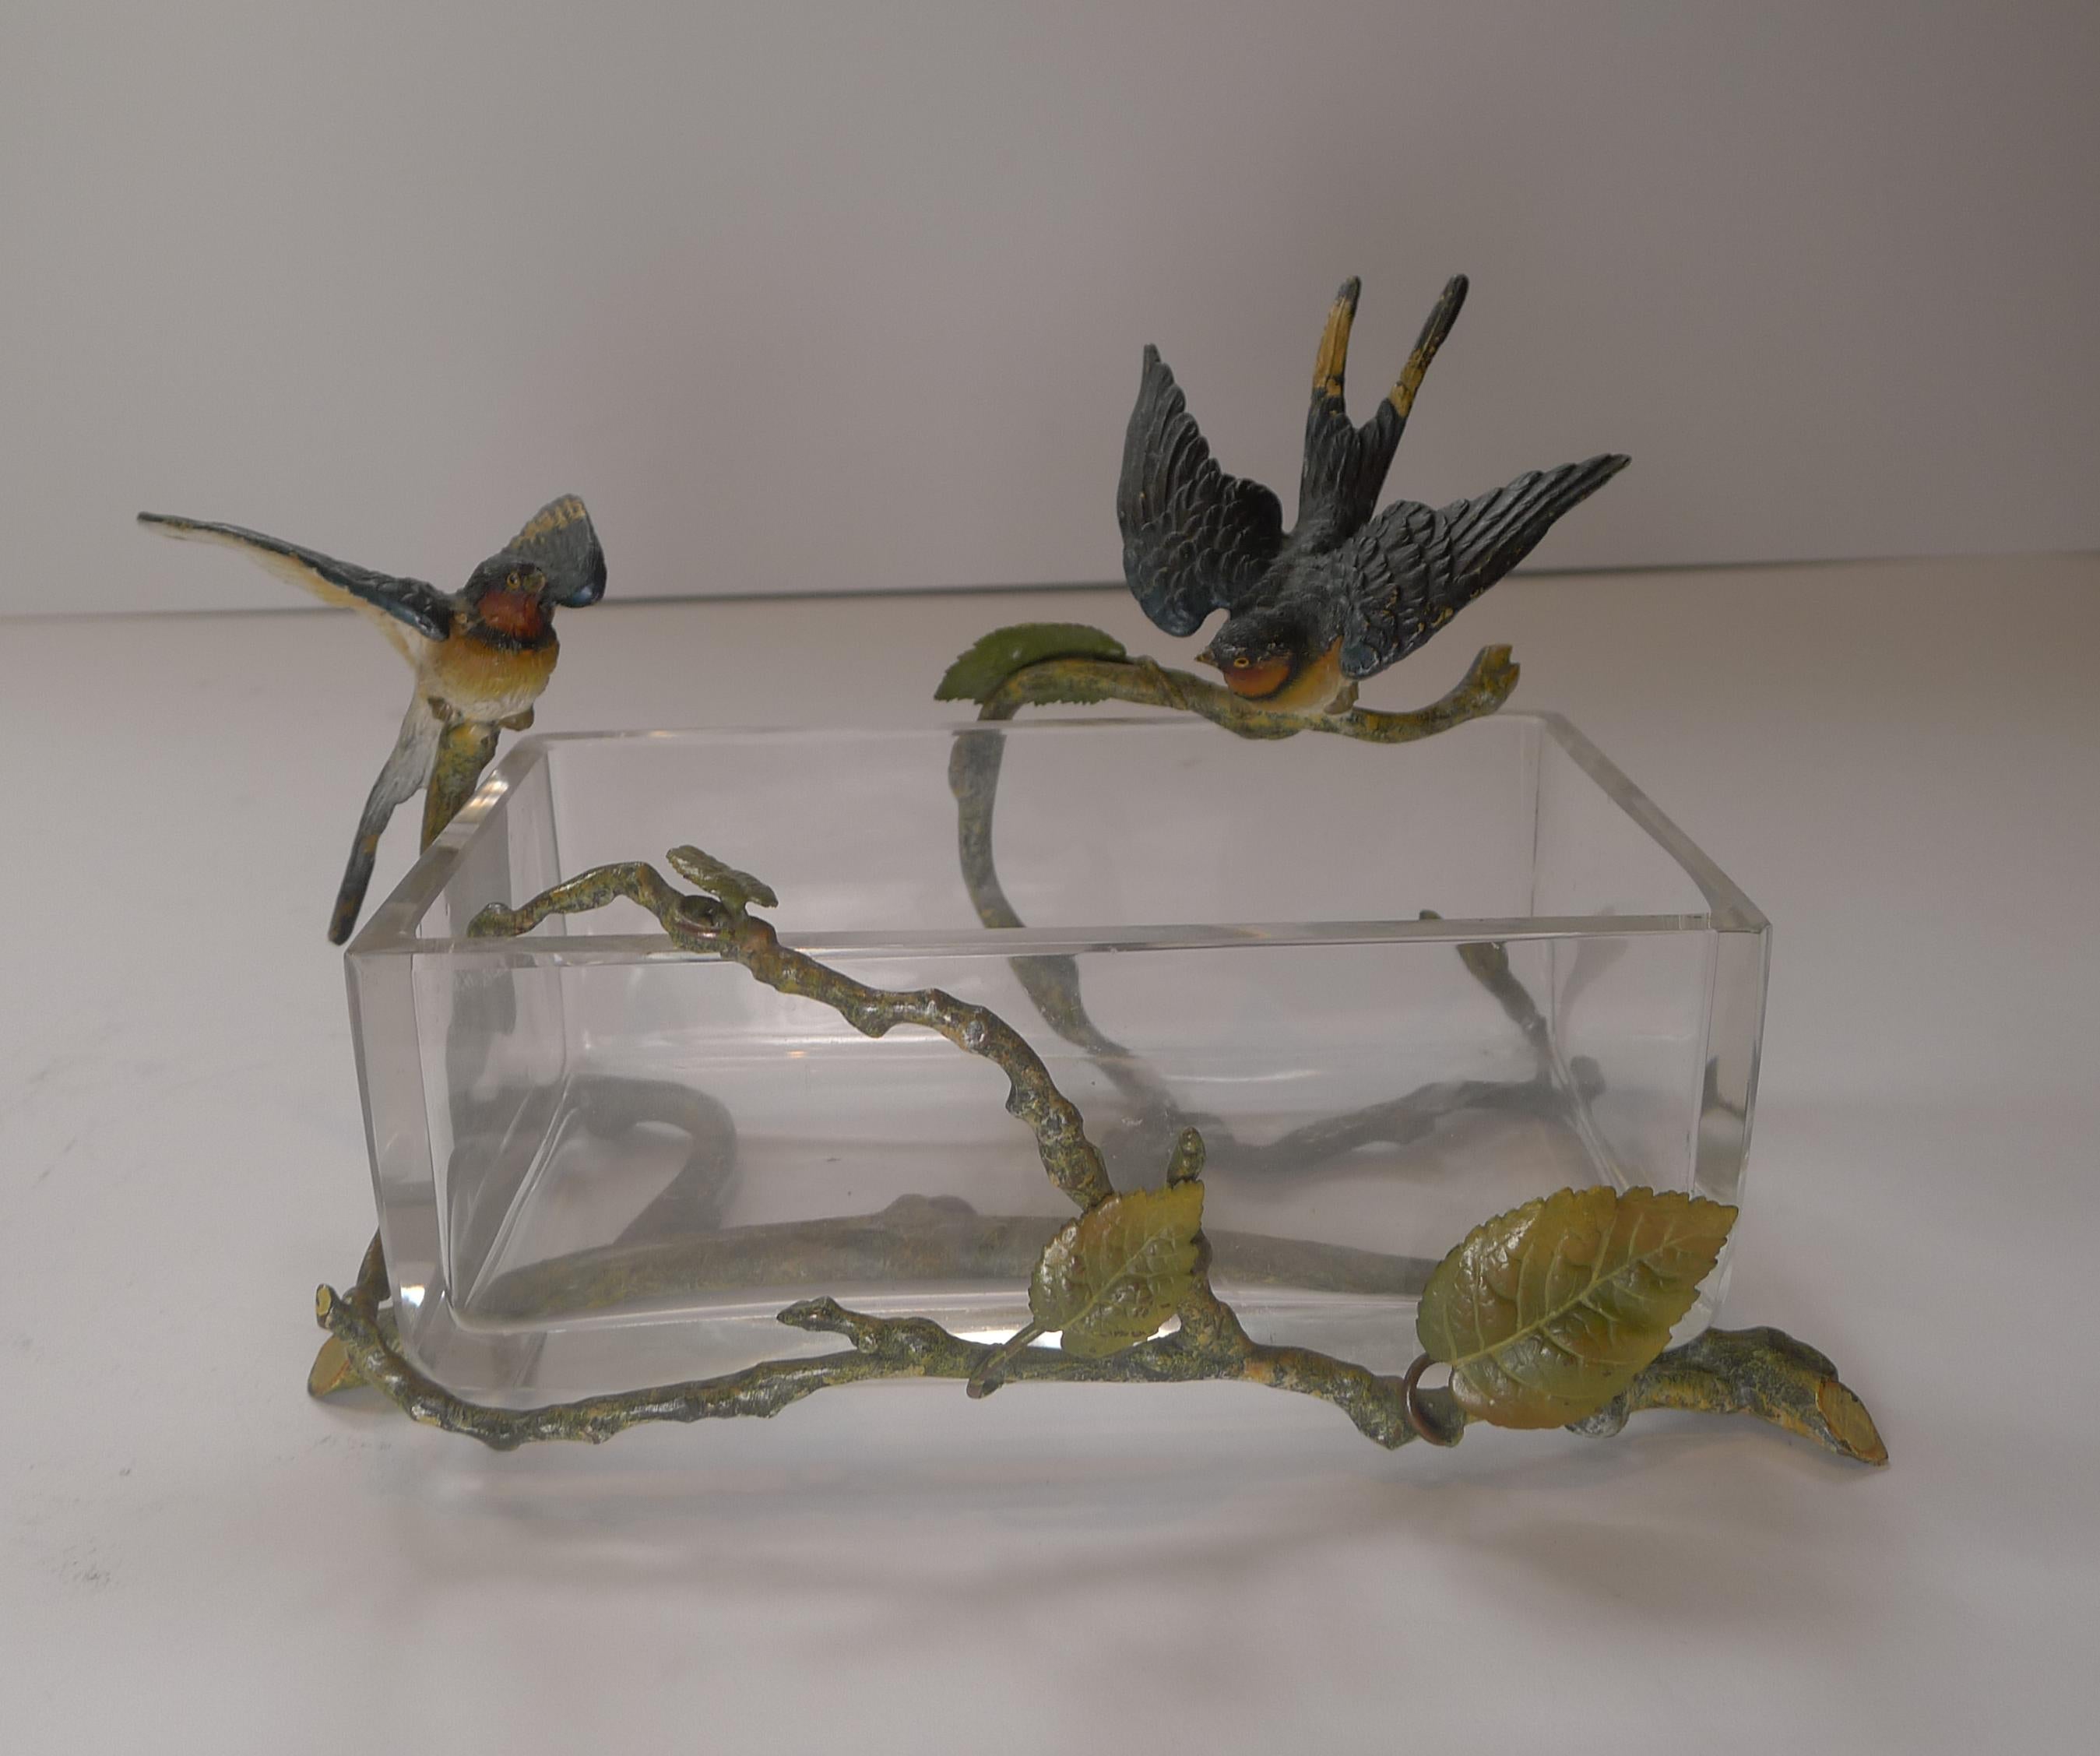 Edwardian Magnificent Crystal Box, Cold Painted Bronze Wrapped, Swallows, c.1900